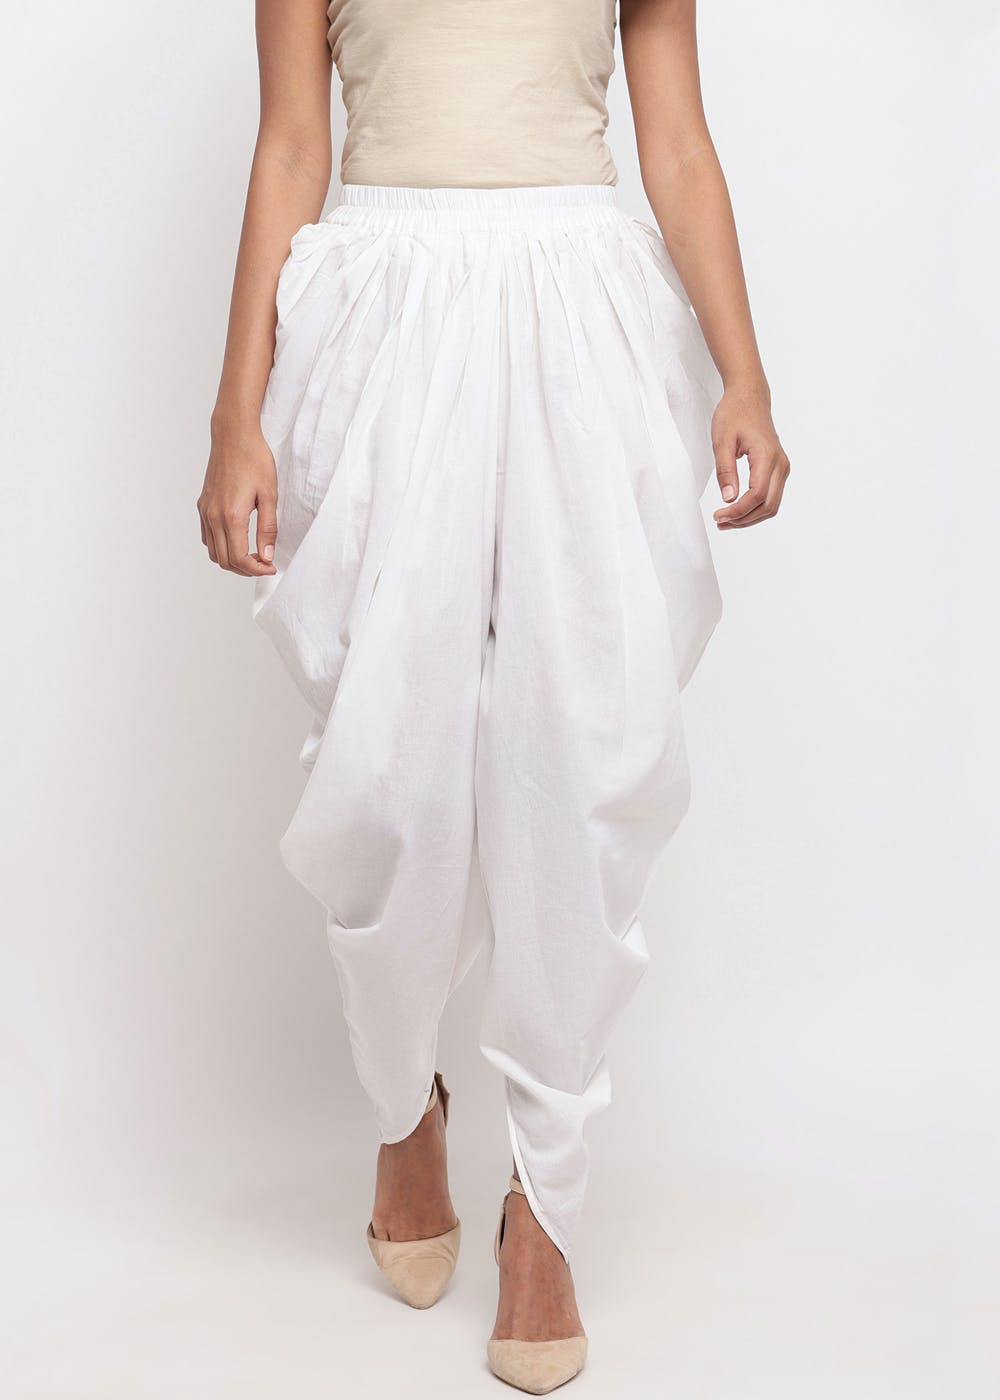 Buy Off White Top With Chikan Embroidery And Dhoti Pant Online  Kalki  Fashion